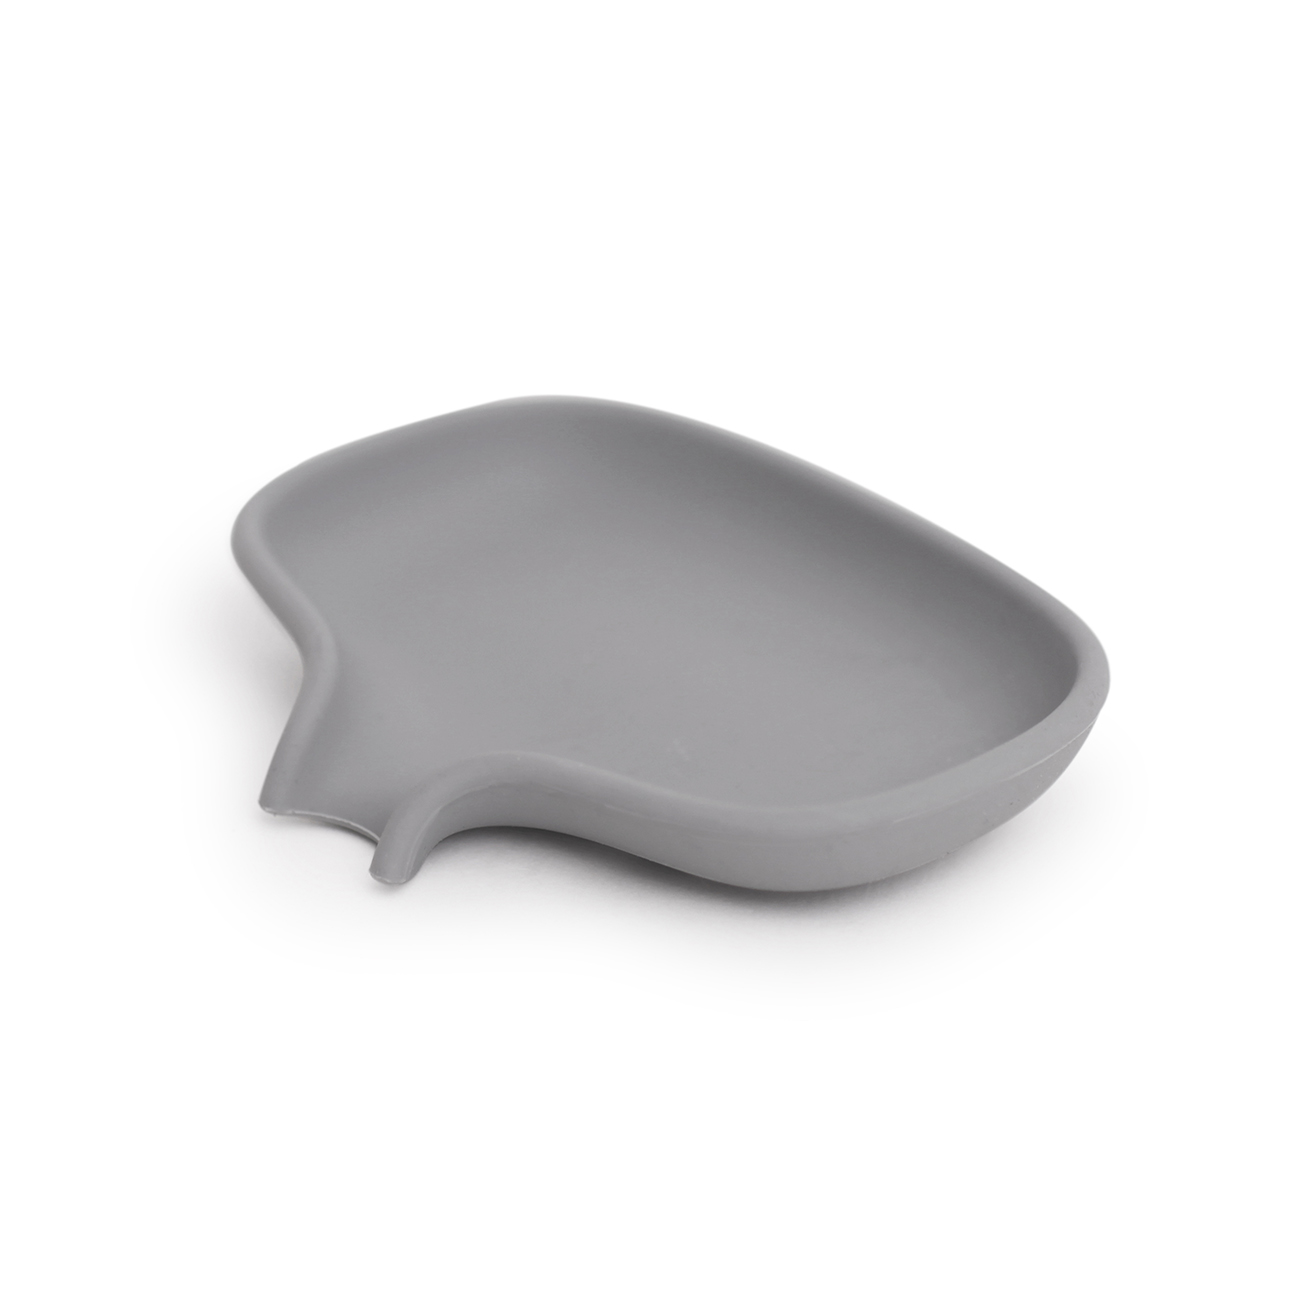 https://www.nordicnest.com/assets/blobs/bosign-soap-dish-with-drainage-spout-silicone-grey/44051-03-01-cc8617fbe7.jpg